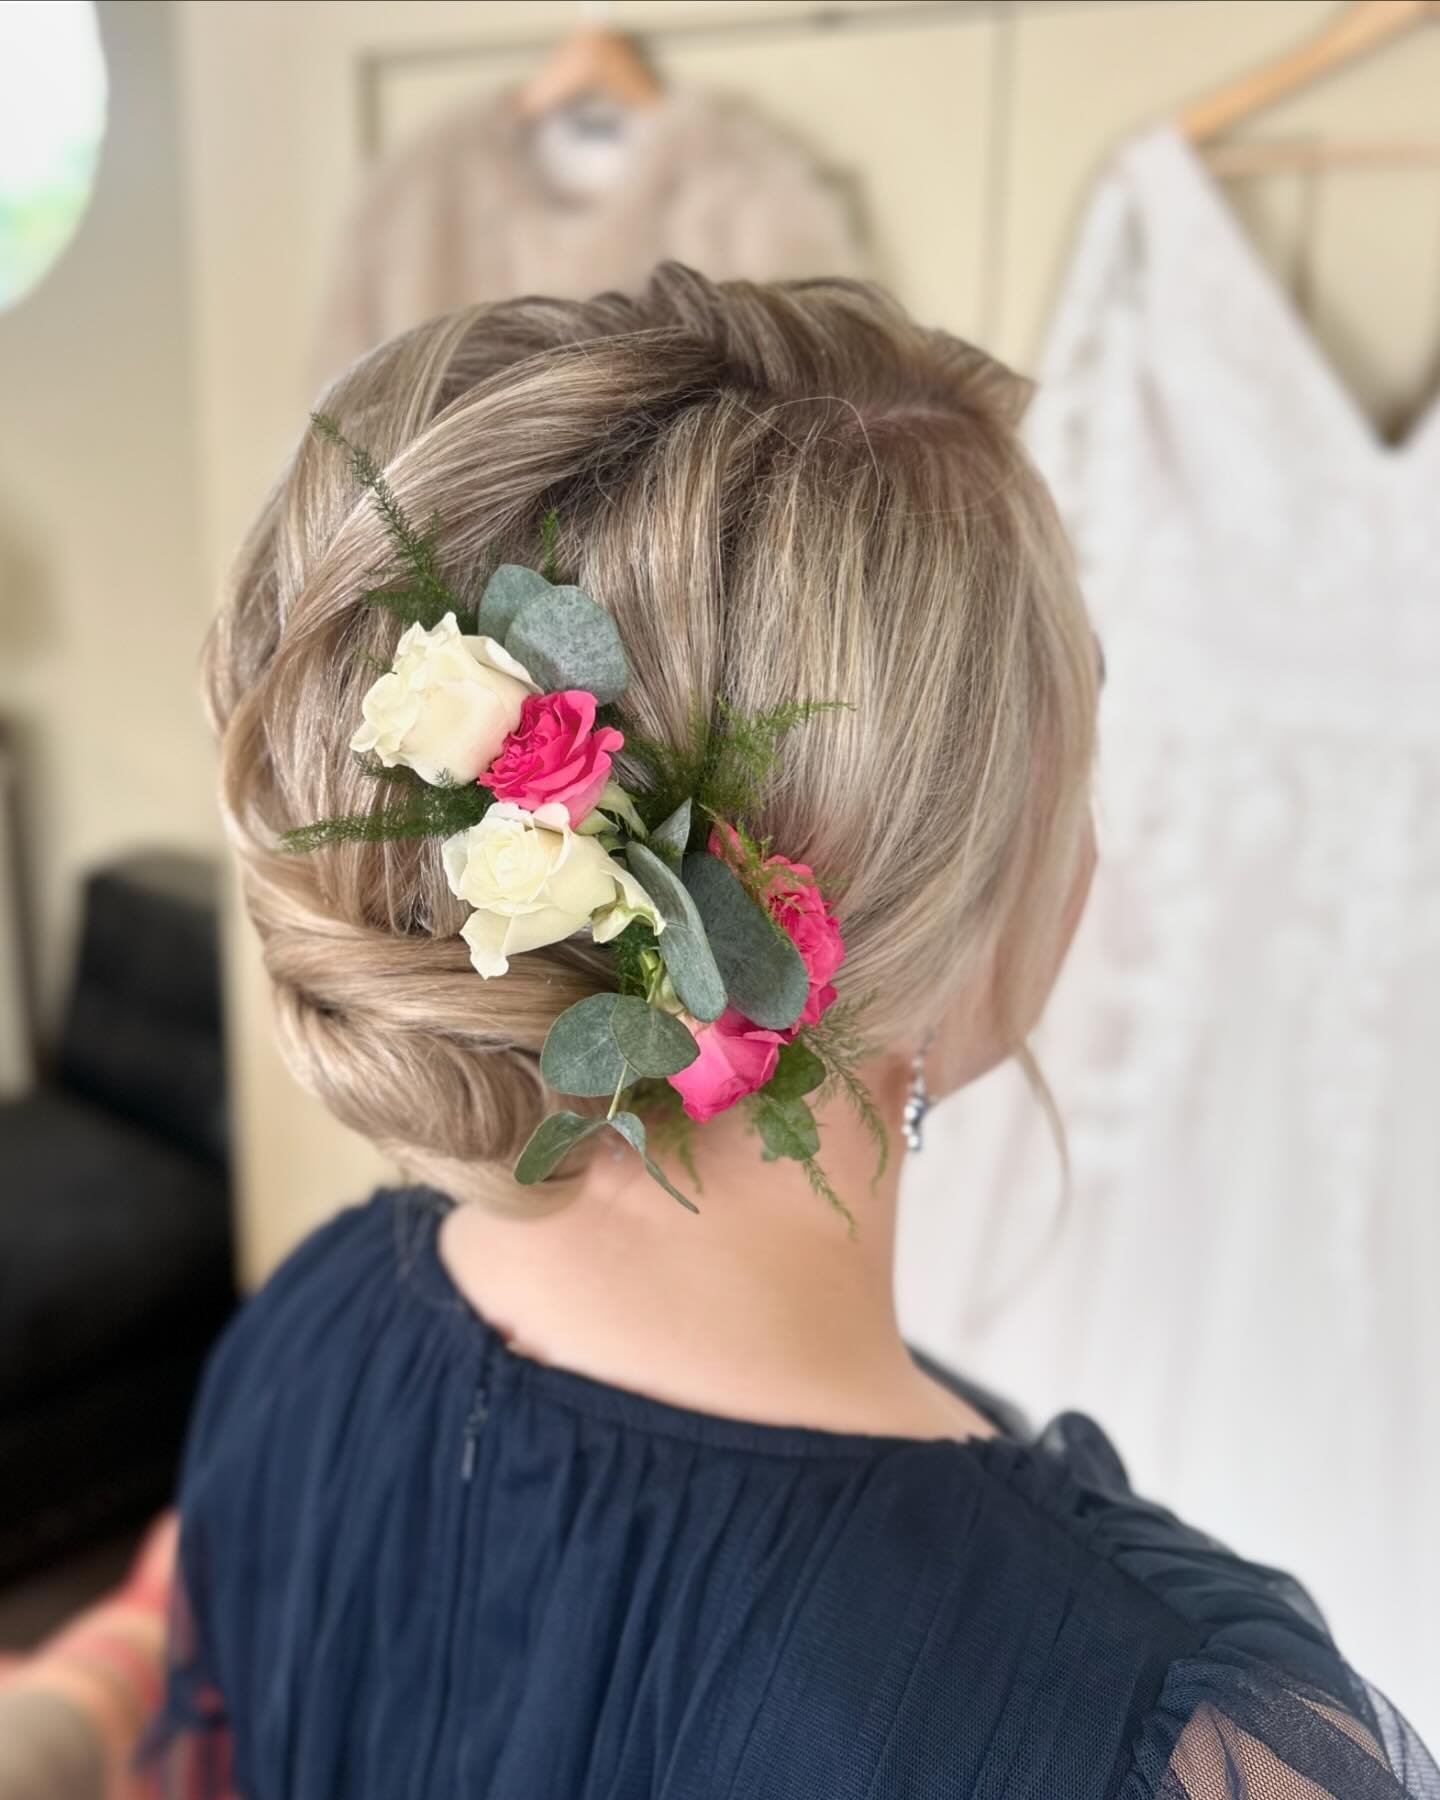 There is nothing quite like real flowers 🌷 worn in your hair on your wedding day . On occasions I&rsquo;ve had to cut the flowers off of a normal comb to then pin them separately into the Hair, because once the flowers are glued to the edge of a com